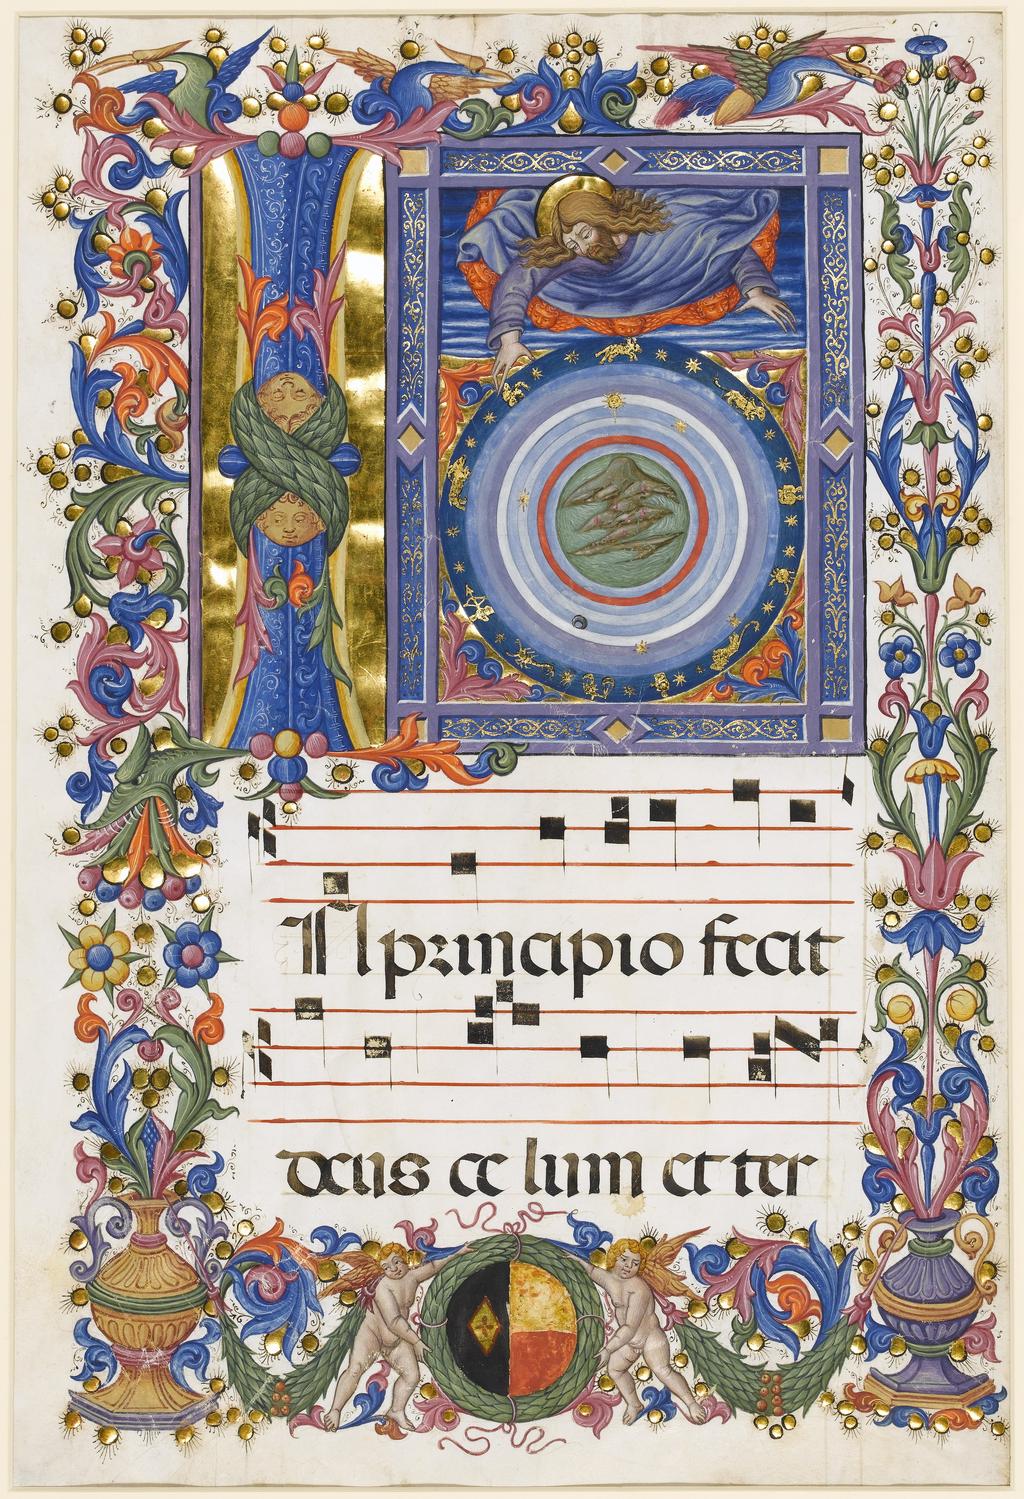 An image of Illuminated Manuscript. Leaf from an Antiphoner. Creation of heaven and earth. Pellegrino di Mariano Rossini (act. 1449 - d.1492). Pietro, Sano di. latin. Gothic bookhand (textualis). Production Place: Siena, Italy. 1460-1477.PHYSICAL DESCRIPTION: Parchment, 578 x 400 mm (398 x 228 mm), 29 long lines, ruled in ink and accommodating two lines of text and two four-line musical staves ruled in red ink on each side of the leaf.CONTENTS: On reverse (original recto): Antiphon for the psalm Salvum me fac of the first nocturn of Matins for Septuagesima Sunday, [Tu Domine servabis nos et cus]todies nos, followed by Ps[almus] Salvum me fac d[eus]. V[ersiculus] Memor fui nocte nominis tui d[omine]. R[esponsorium] Et custodivi legem tuam; the miniature and initial, which would have been on the original verso, introduced the responsory for the first lesson of Matins for Septuagesima Sunday, In principio fecit Deus celum et ter[ram] (Gen I:1).DECORATION: Large framed miniature of the Creation of heaven and earth, accompanied by a graded blue initial [I, 17 ll.] on burnished gold ground, with acanthus leaves extending into a full border containing birds, vases, gold balls and putti supporting a wreath medallion with the (overpainted) arms of the Spedale di Santa Maria della Scala in Siena.ORNAMENTATION: Alternate blue and red penwork initials [2-4 ll.] with reserved ornament.